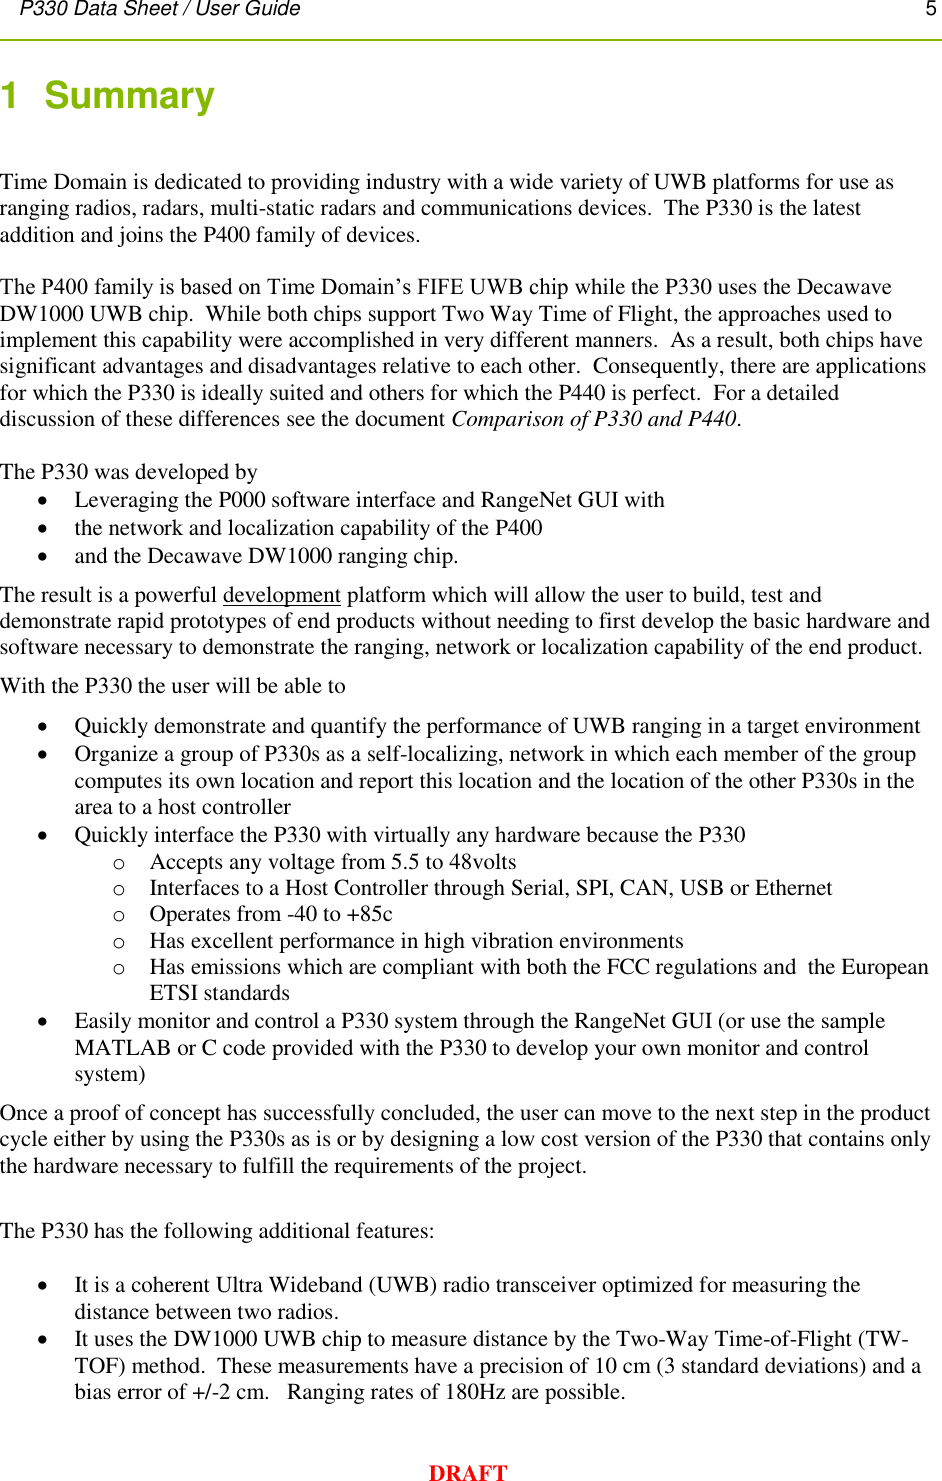 P330 Data Sheet / User Guide       5        DRAFT 1  Summary   Time Domain is dedicated to providing industry with a wide variety of UWB platforms for use as ranging radios, radars, multi-static radars and communications devices.  The P330 is the latest addition and joins the P400 family of devices.  The P400 family is based on Time Domain’s FIFE UWB chip while the P330 uses the Decawave DW1000 UWB chip.  While both chips support Two Way Time of Flight, the approaches used to implement this capability were accomplished in very different manners.  As a result, both chips have significant advantages and disadvantages relative to each other.  Consequently, there are applications for which the P330 is ideally suited and others for which the P440 is perfect.  For a detailed discussion of these differences see the document Comparison of P330 and P440.  The P330 was developed by   Leveraging the P000 software interface and RangeNet GUI with   the network and localization capability of the P400  and the Decawave DW1000 ranging chip.  The result is a powerful development platform which will allow the user to build, test and demonstrate rapid prototypes of end products without needing to first develop the basic hardware and software necessary to demonstrate the ranging, network or localization capability of the end product. With the P330 the user will be able to   Quickly demonstrate and quantify the performance of UWB ranging in a target environment  Organize a group of P330s as a self-localizing, network in which each member of the group  computes its own location and report this location and the location of the other P330s in the area to a host controller  Quickly interface the P330 with virtually any hardware because the P330 o Accepts any voltage from 5.5 to 48volts o Interfaces to a Host Controller through Serial, SPI, CAN, USB or Ethernet o Operates from -40 to +85c o Has excellent performance in high vibration environments o Has emissions which are compliant with both the FCC regulations and  the European ETSI standards  Easily monitor and control a P330 system through the RangeNet GUI (or use the sample MATLAB or C code provided with the P330 to develop your own monitor and control system) Once a proof of concept has successfully concluded, the user can move to the next step in the product cycle either by using the P330s as is or by designing a low cost version of the P330 that contains only the hardware necessary to fulfill the requirements of the project.  The P330 has the following additional features:   It is a coherent Ultra Wideband (UWB) radio transceiver optimized for measuring the distance between two radios.  It uses the DW1000 UWB chip to measure distance by the Two-Way Time-of-Flight (TW-TOF) method.  These measurements have a precision of 10 cm (3 standard deviations) and a bias error of +/-2 cm.   Ranging rates of 180Hz are possible. 